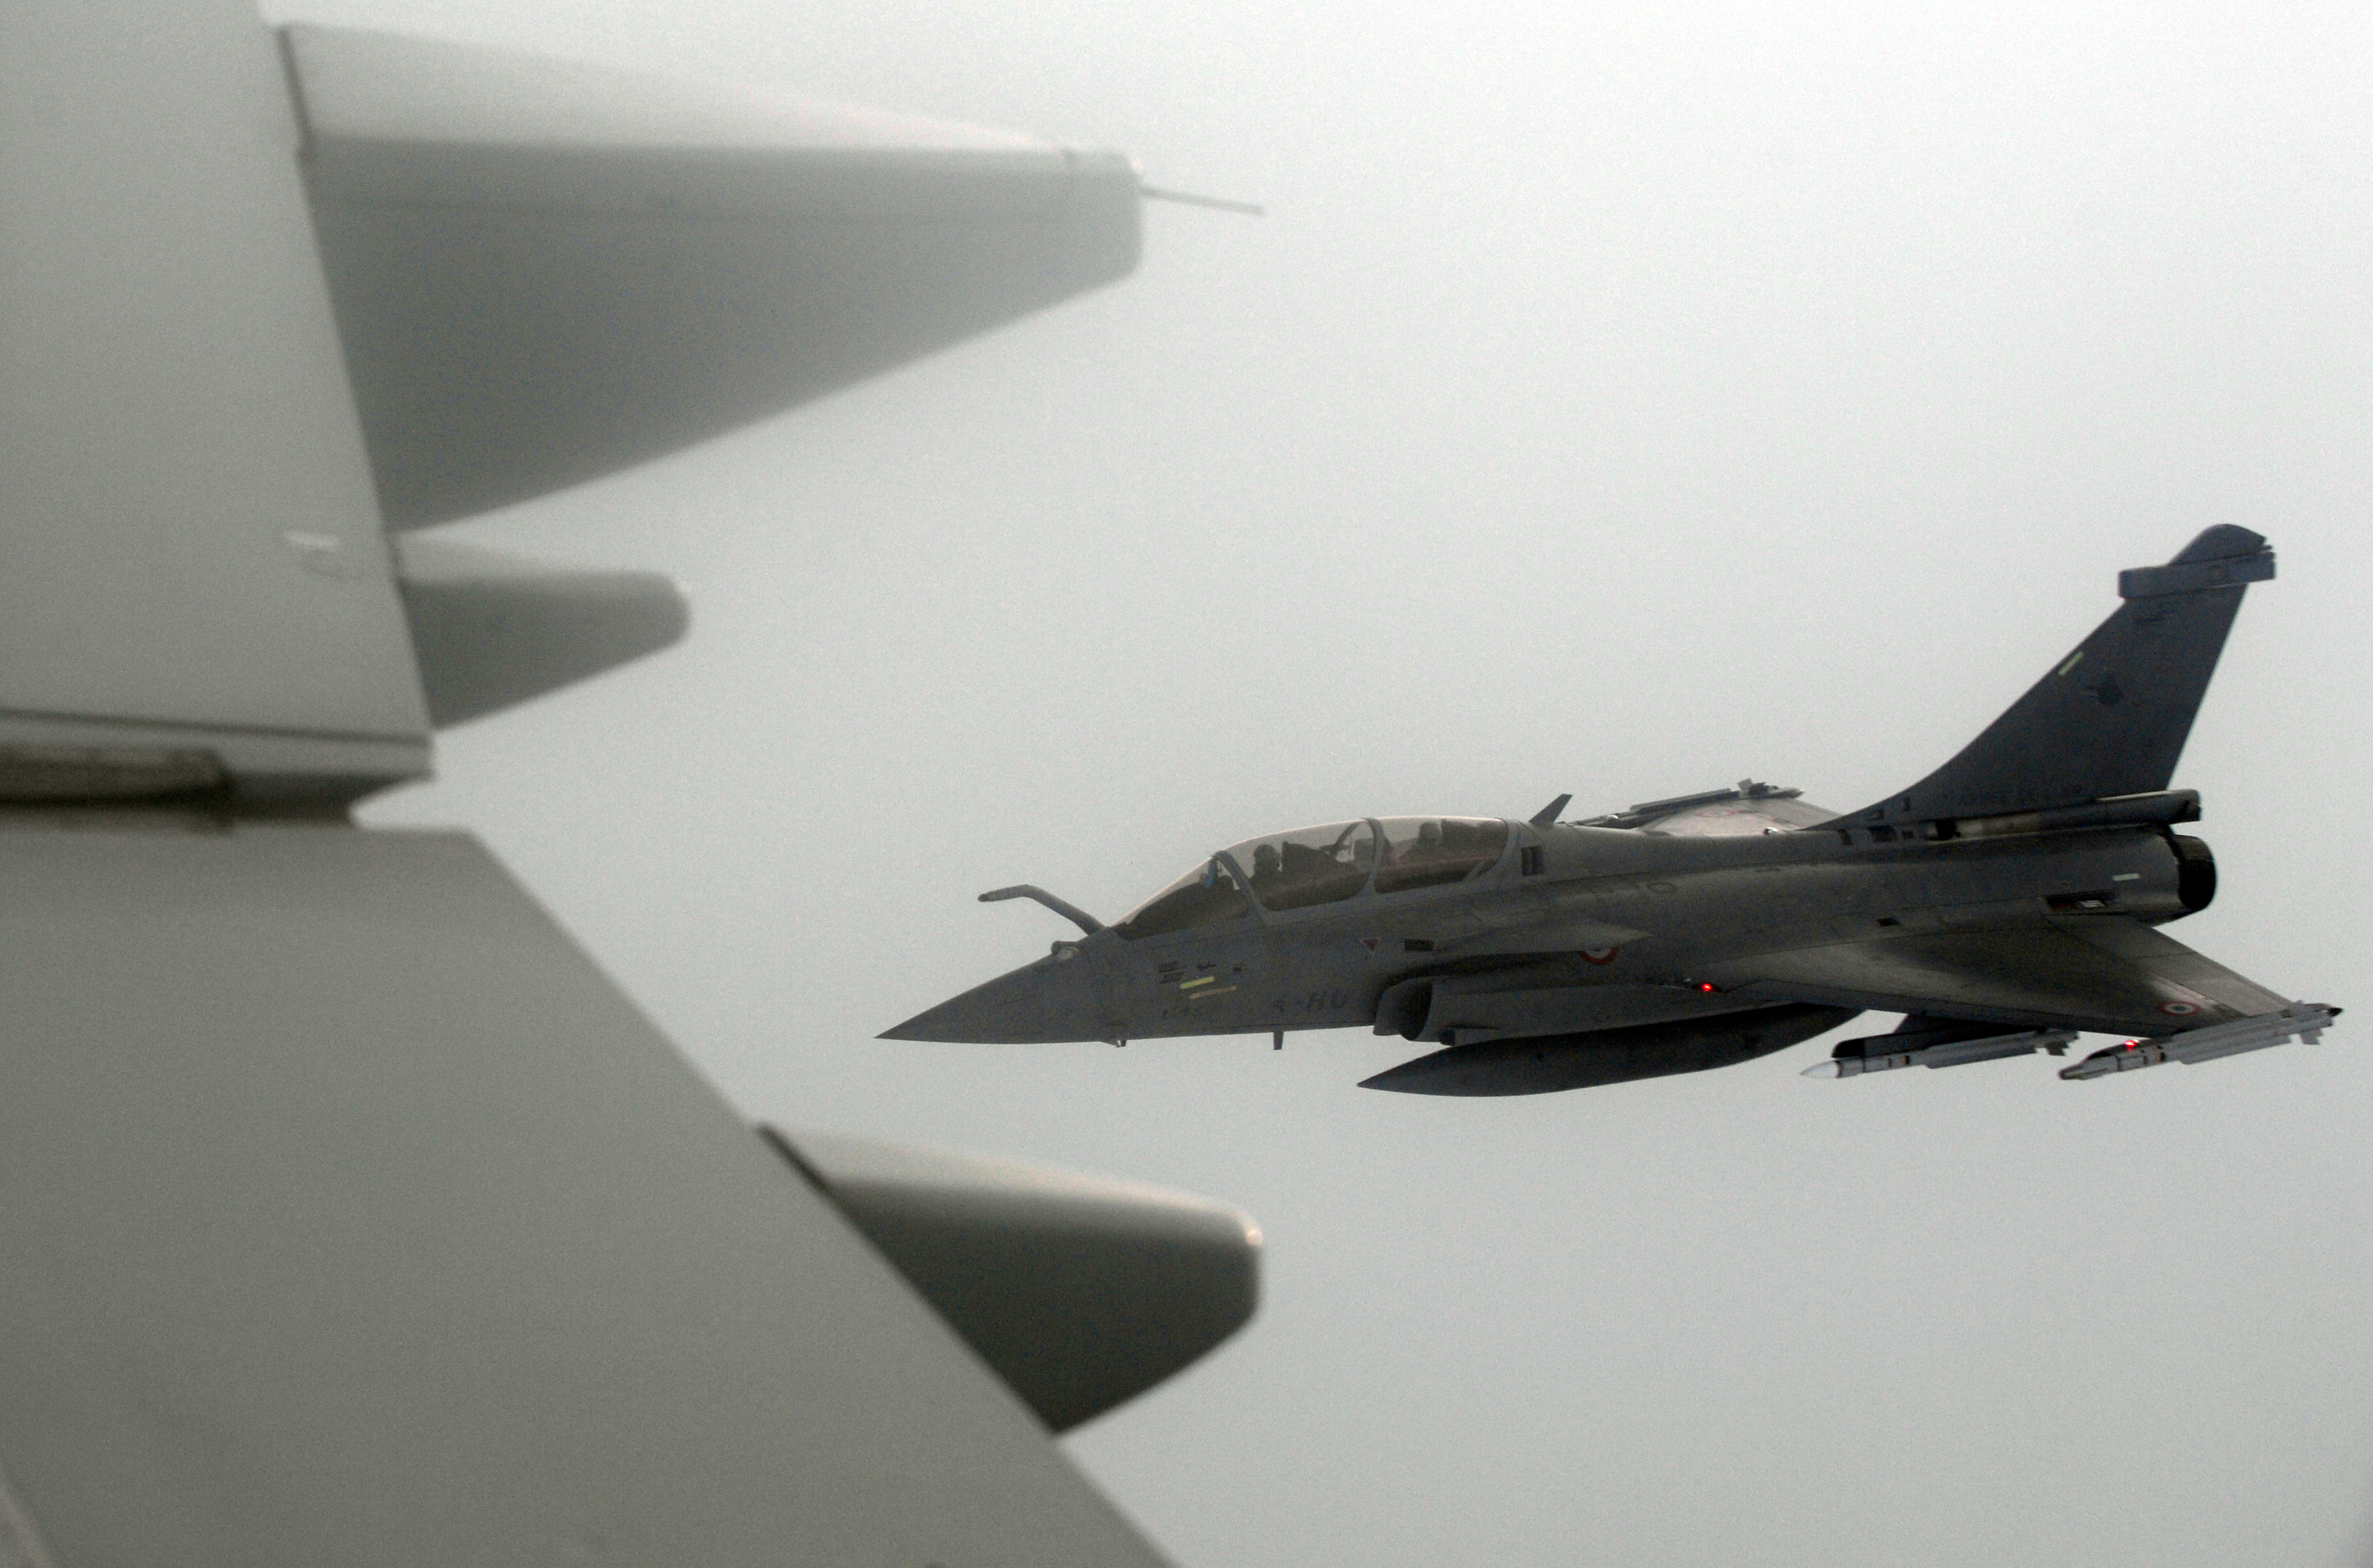 A French Rafale fighter jet demonstrates the interception of a Belgian air force transport plane as they fly over France